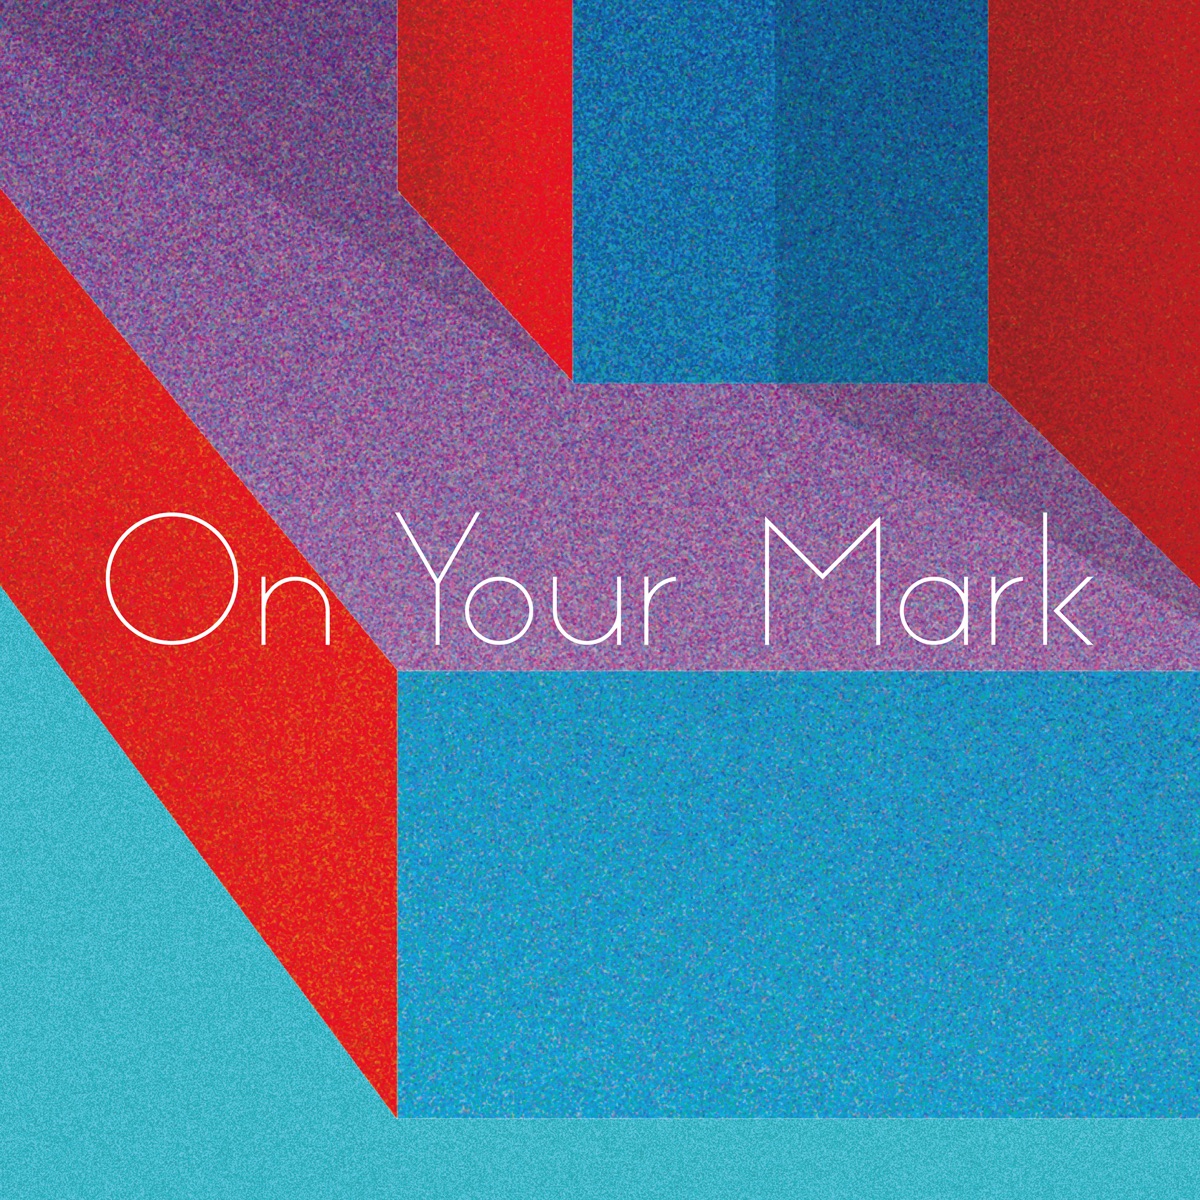 『Awesome City Club - On Your Mark 歌詞』収録の『On Your Mark』ジャケット